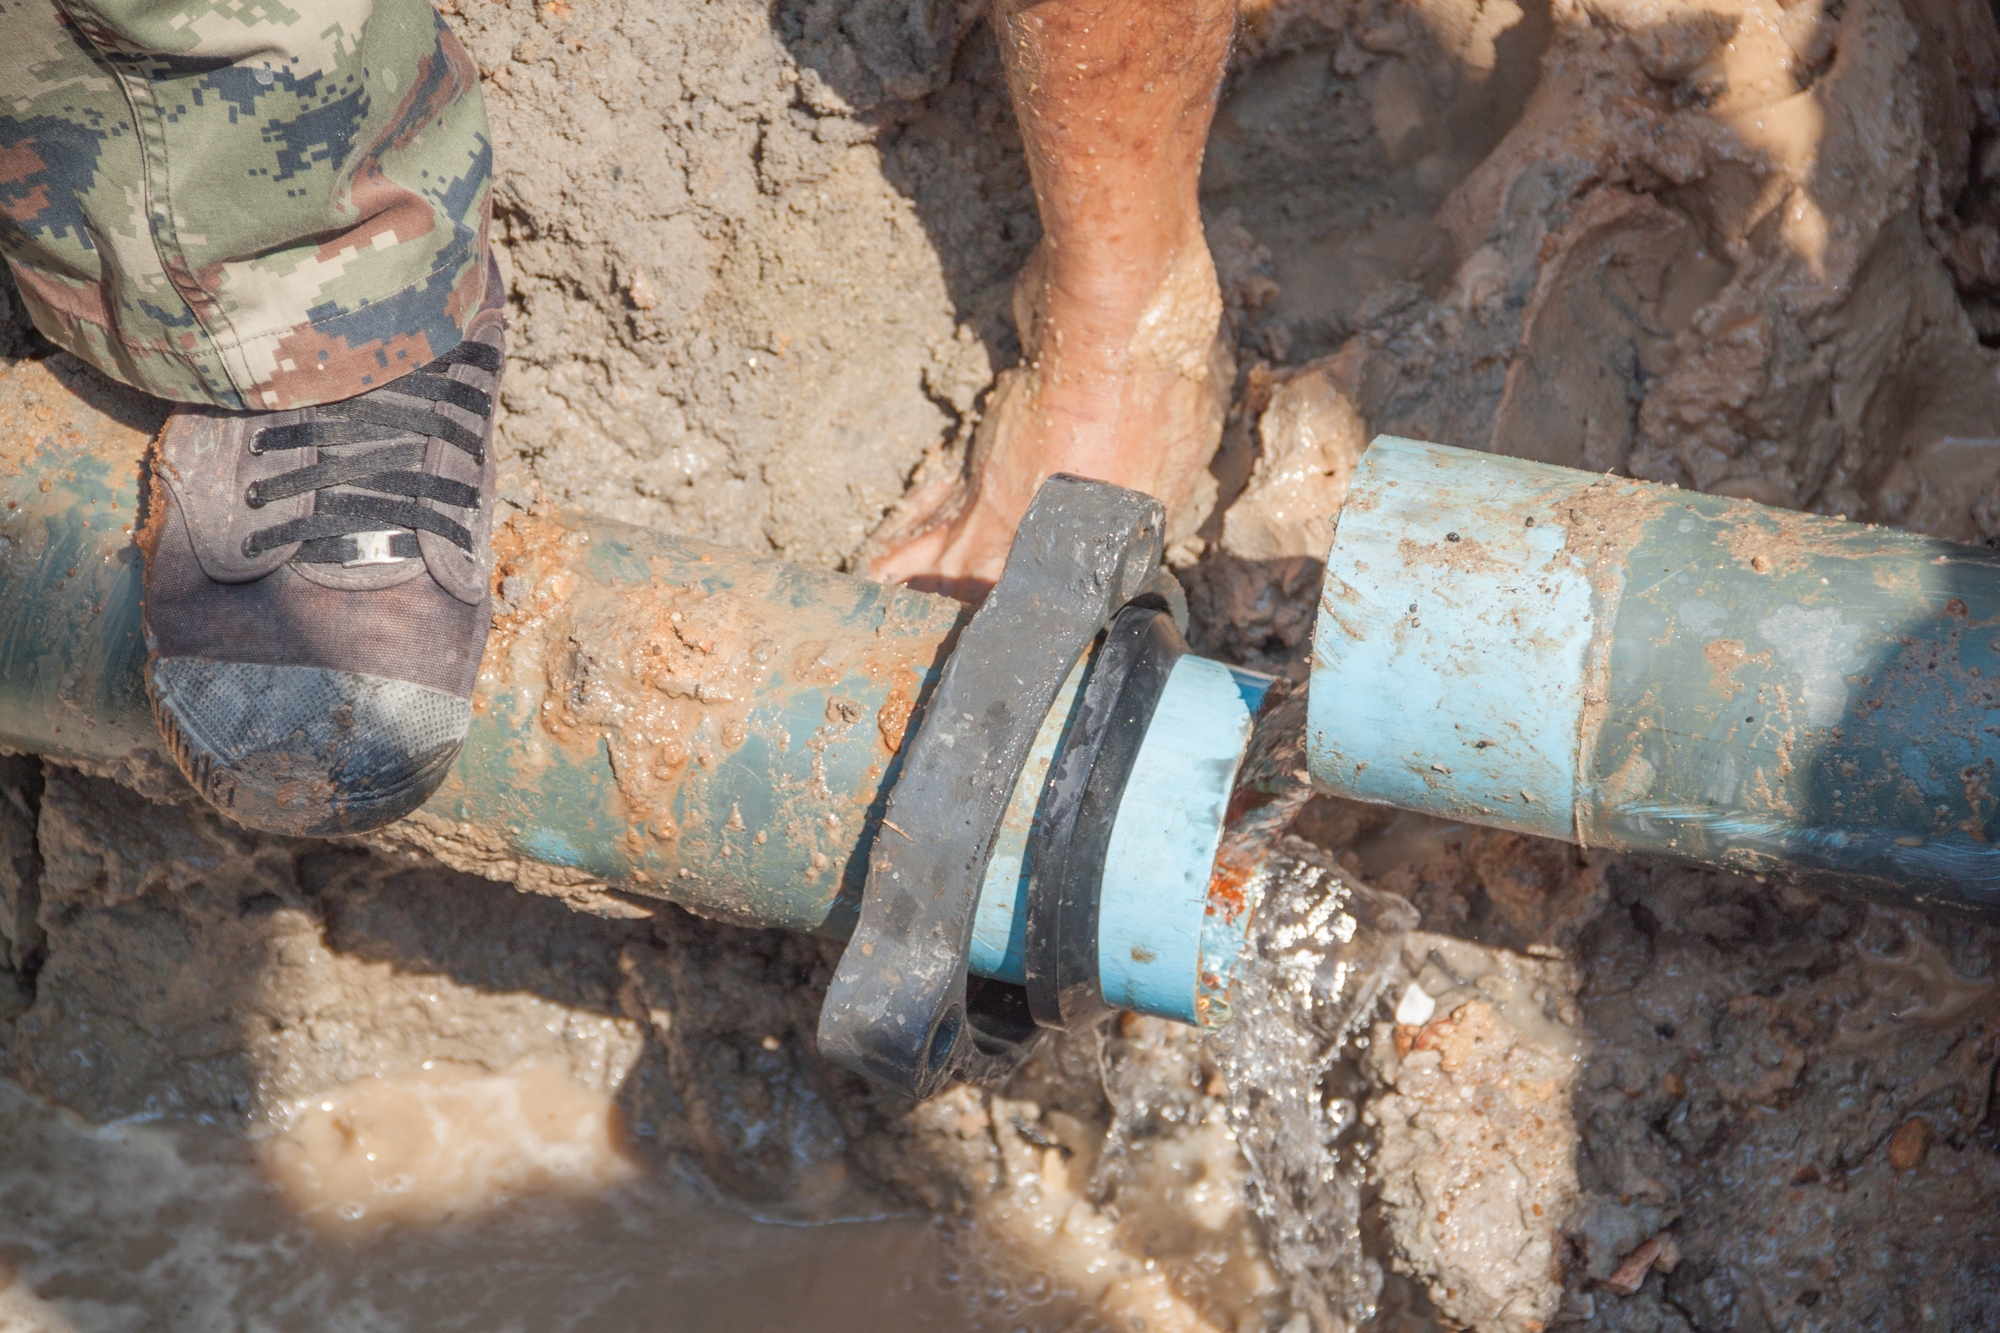 Identifying and fixing backed up plumbing in your home